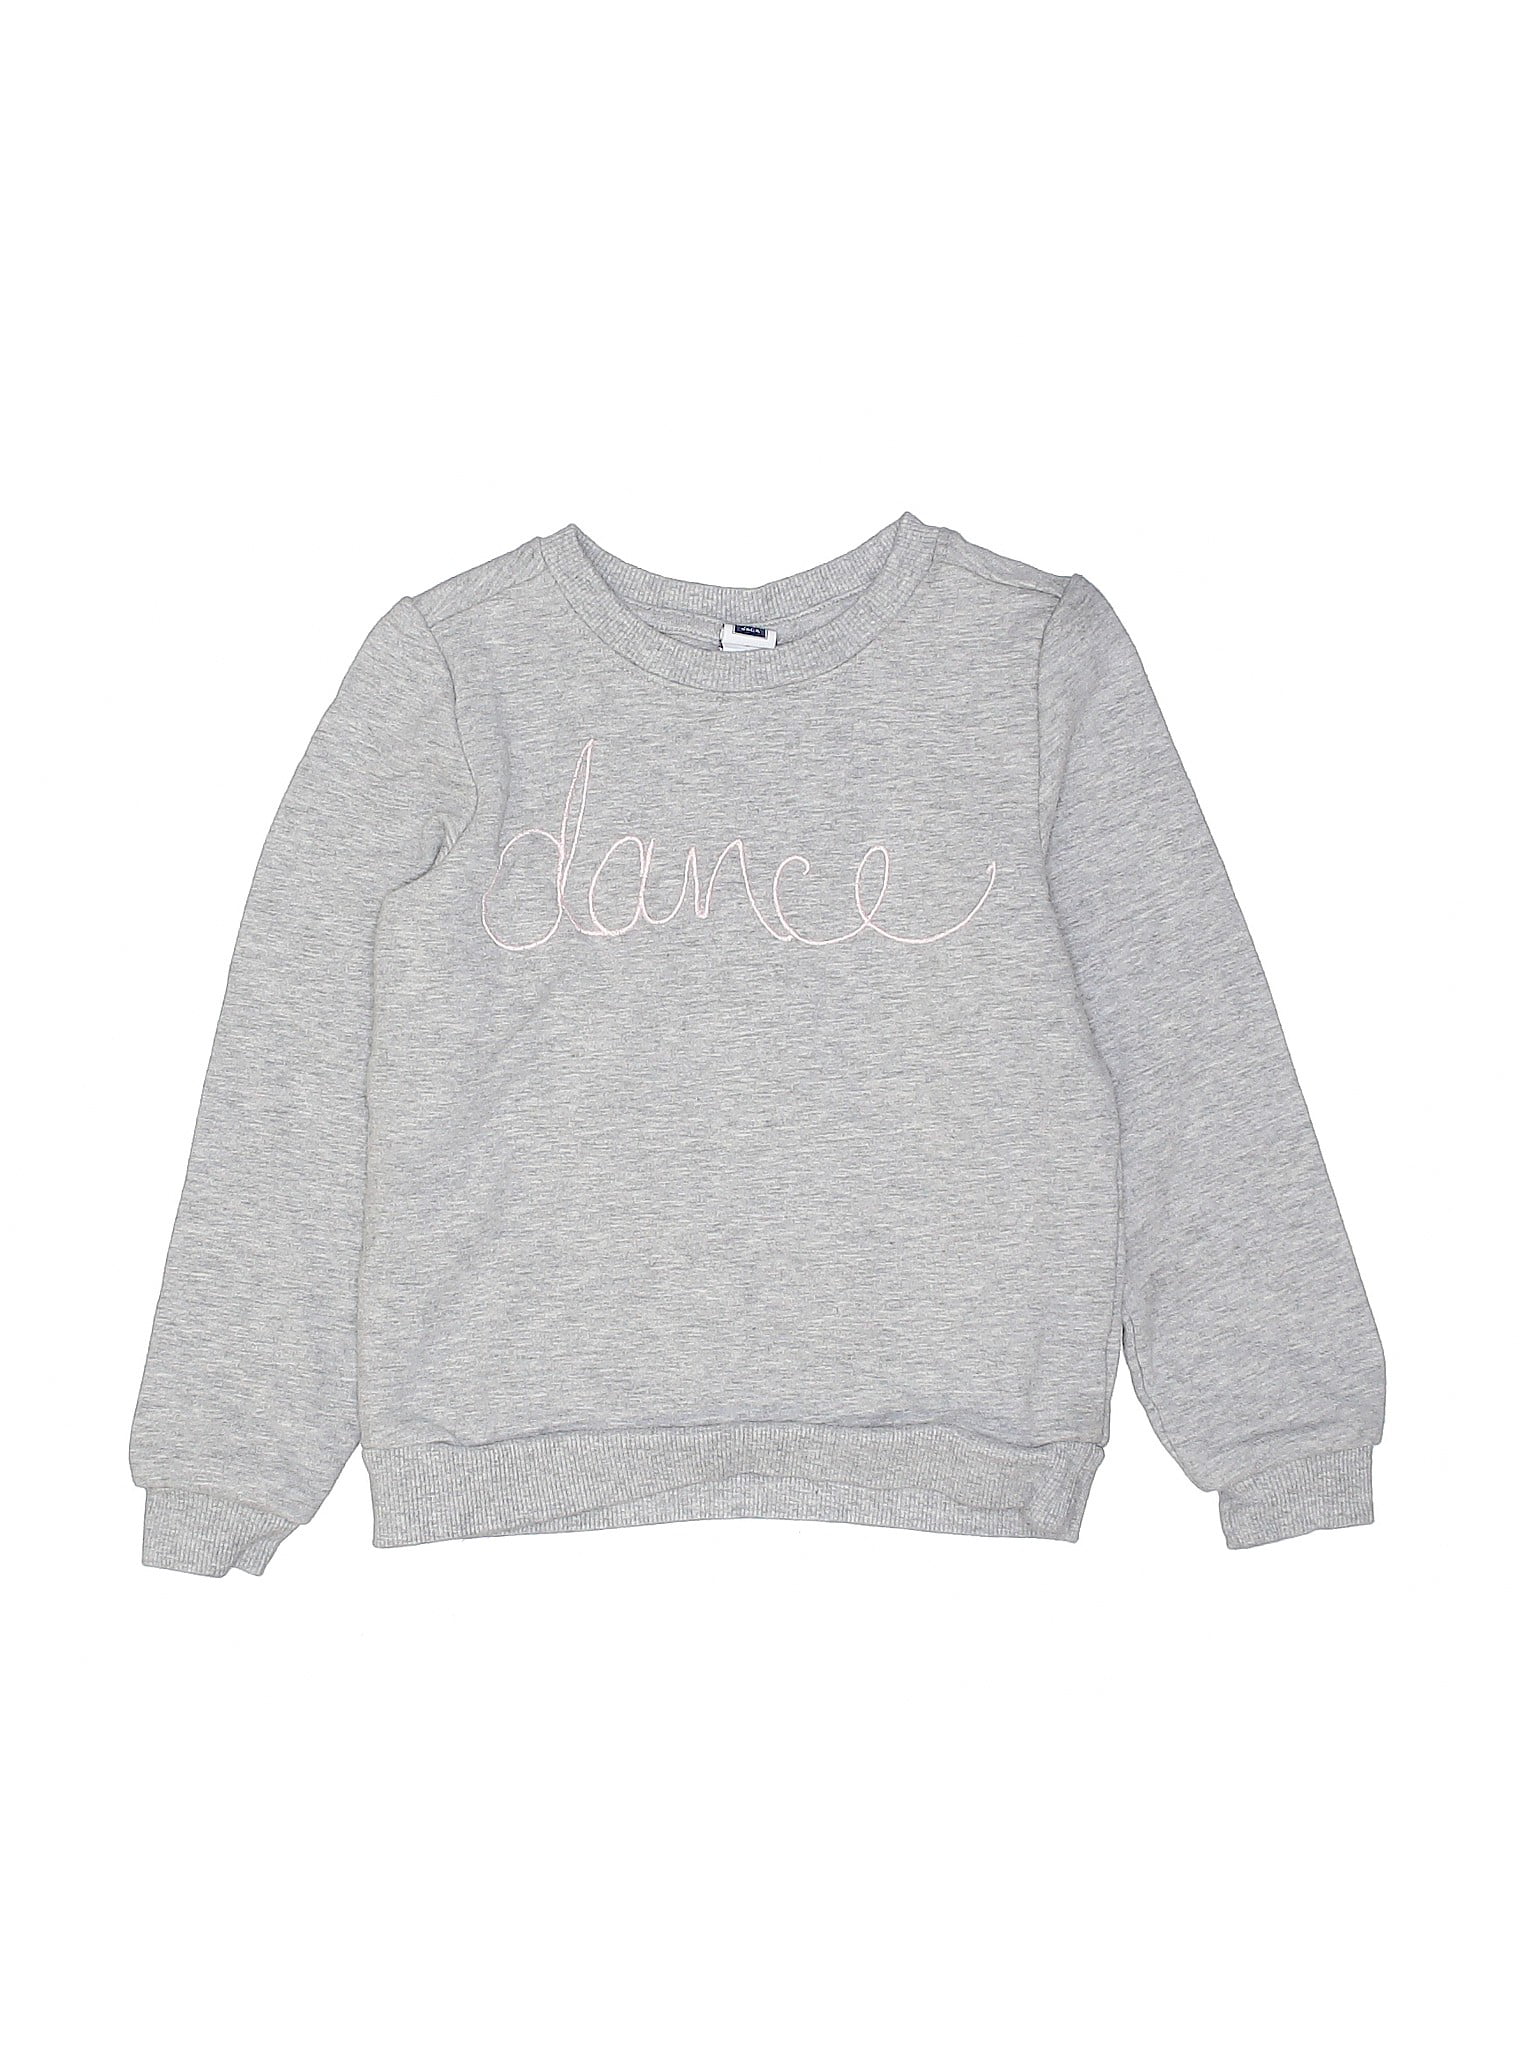 Janie and Jack - Pre-Owned Janie and Jack Girl's Size 4 Sweatshirt ...